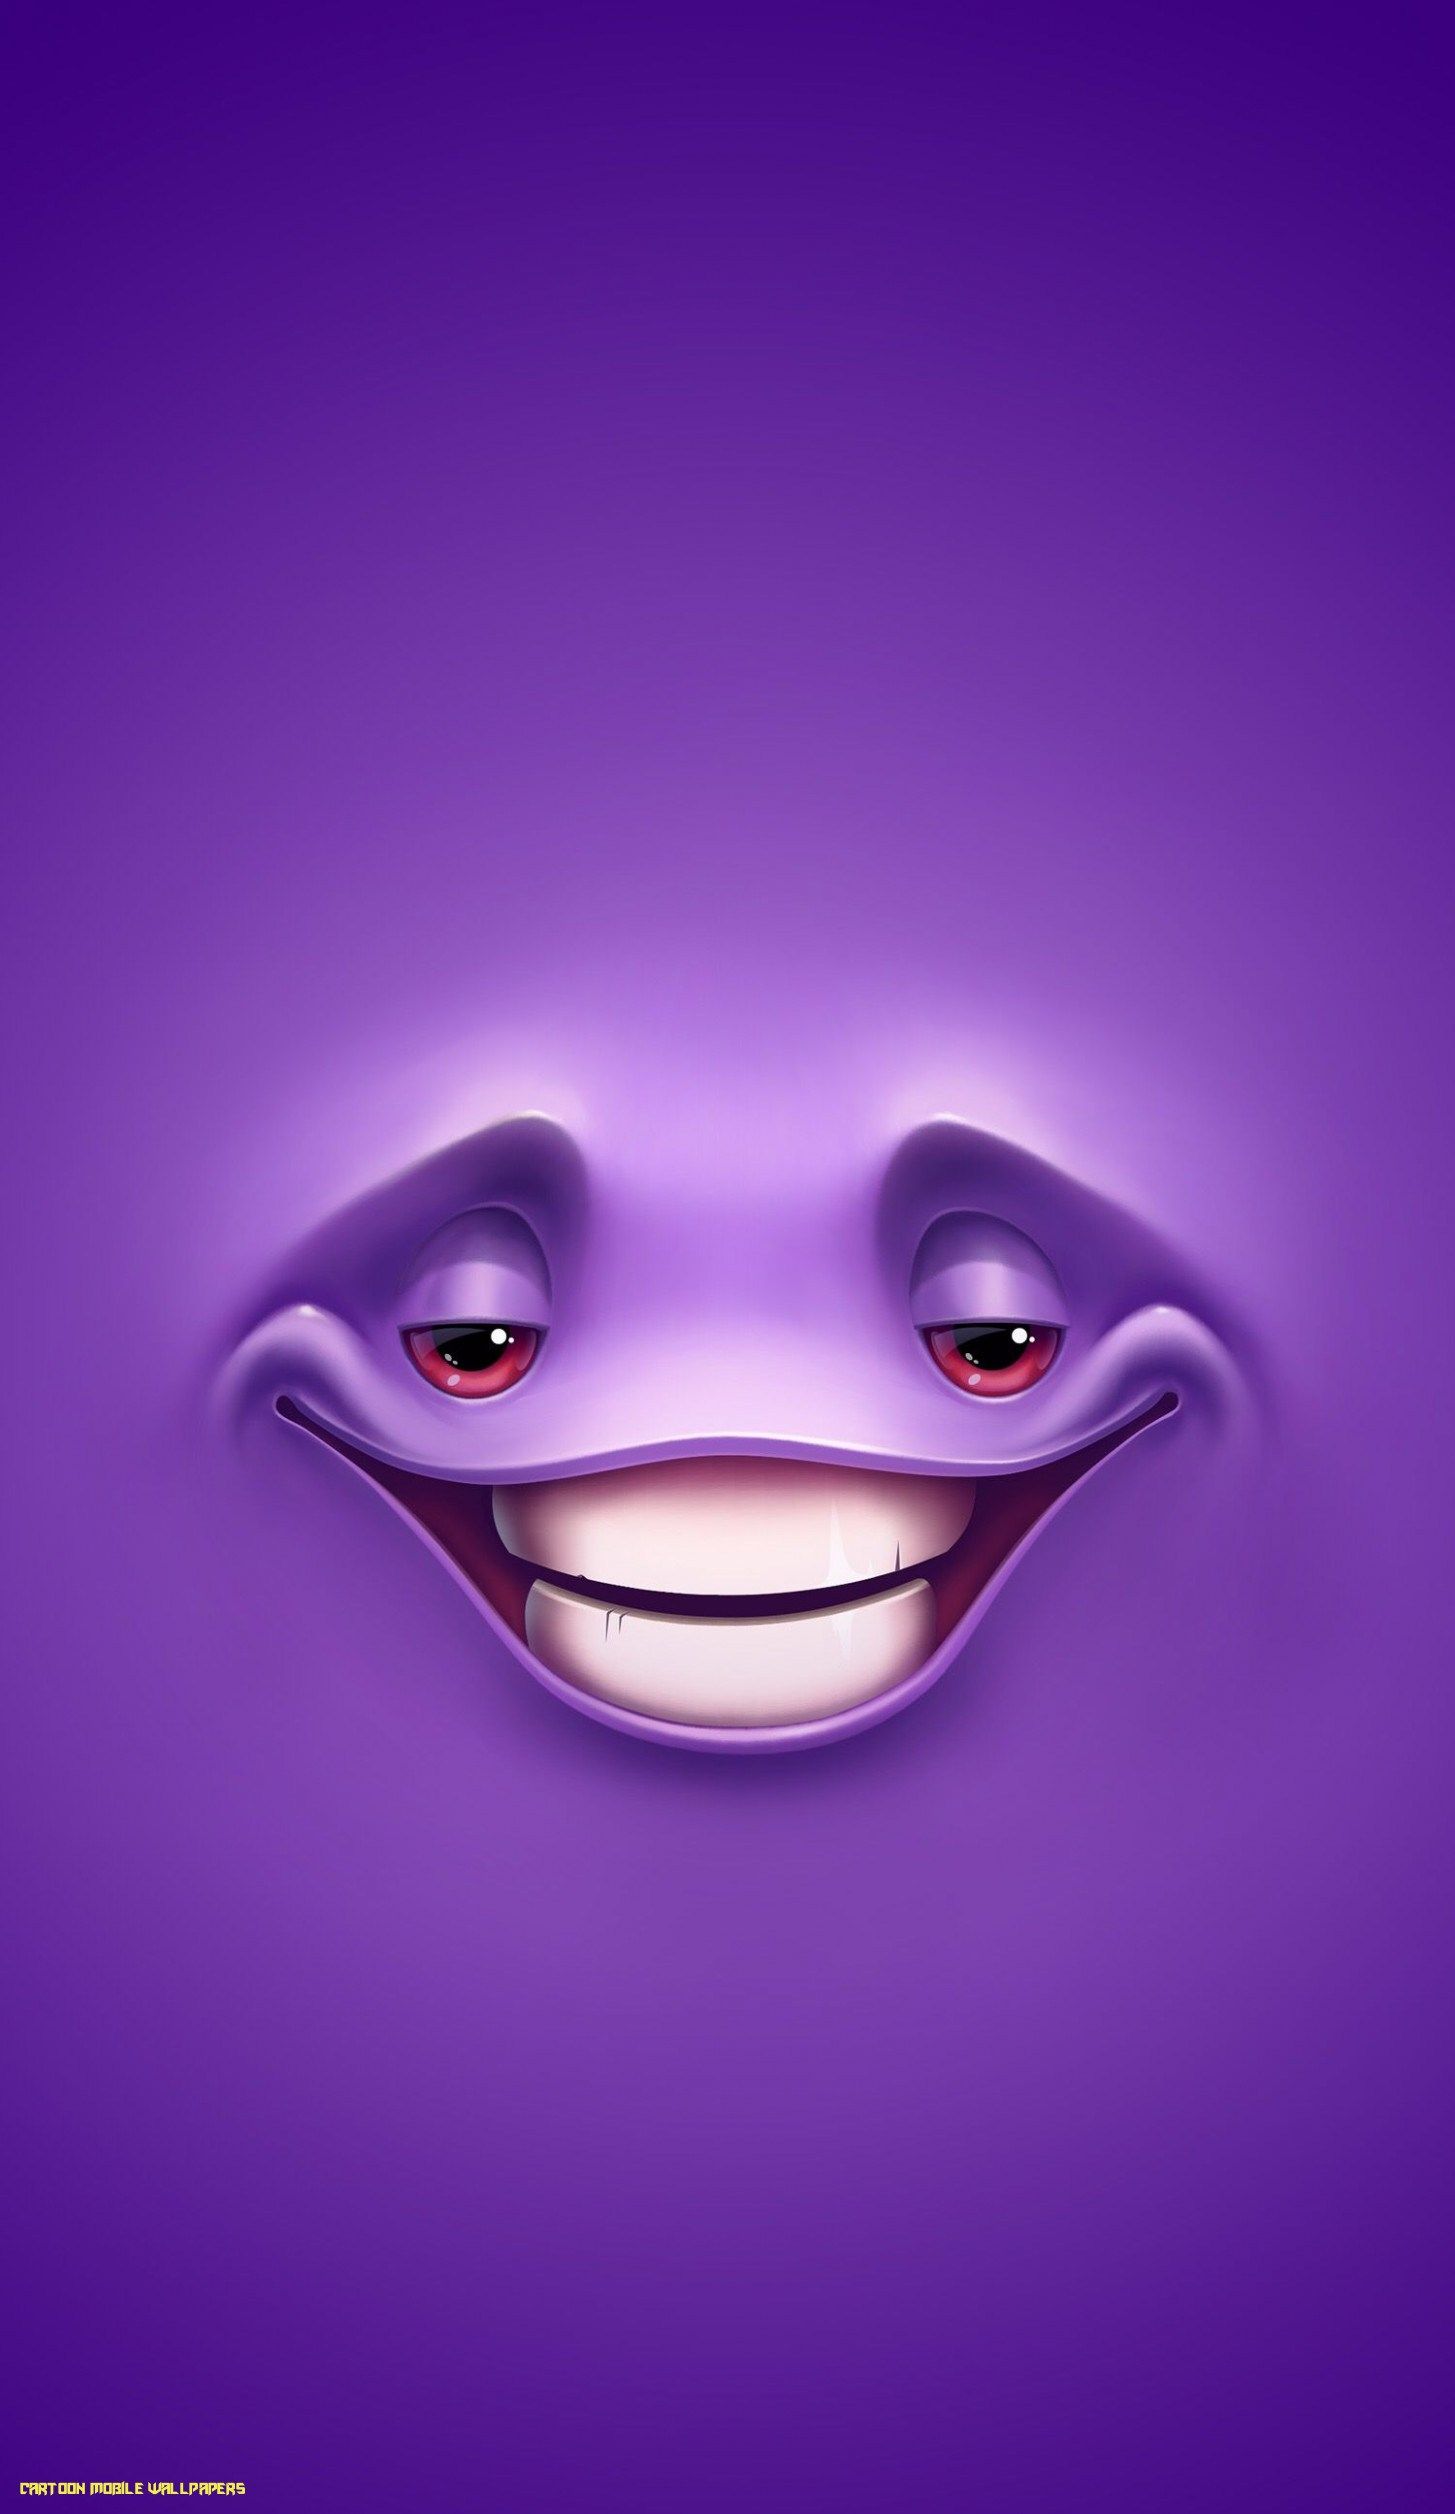 Say Cheese!. Funny iphone wallpaper, Funny wallpaper, Crazy